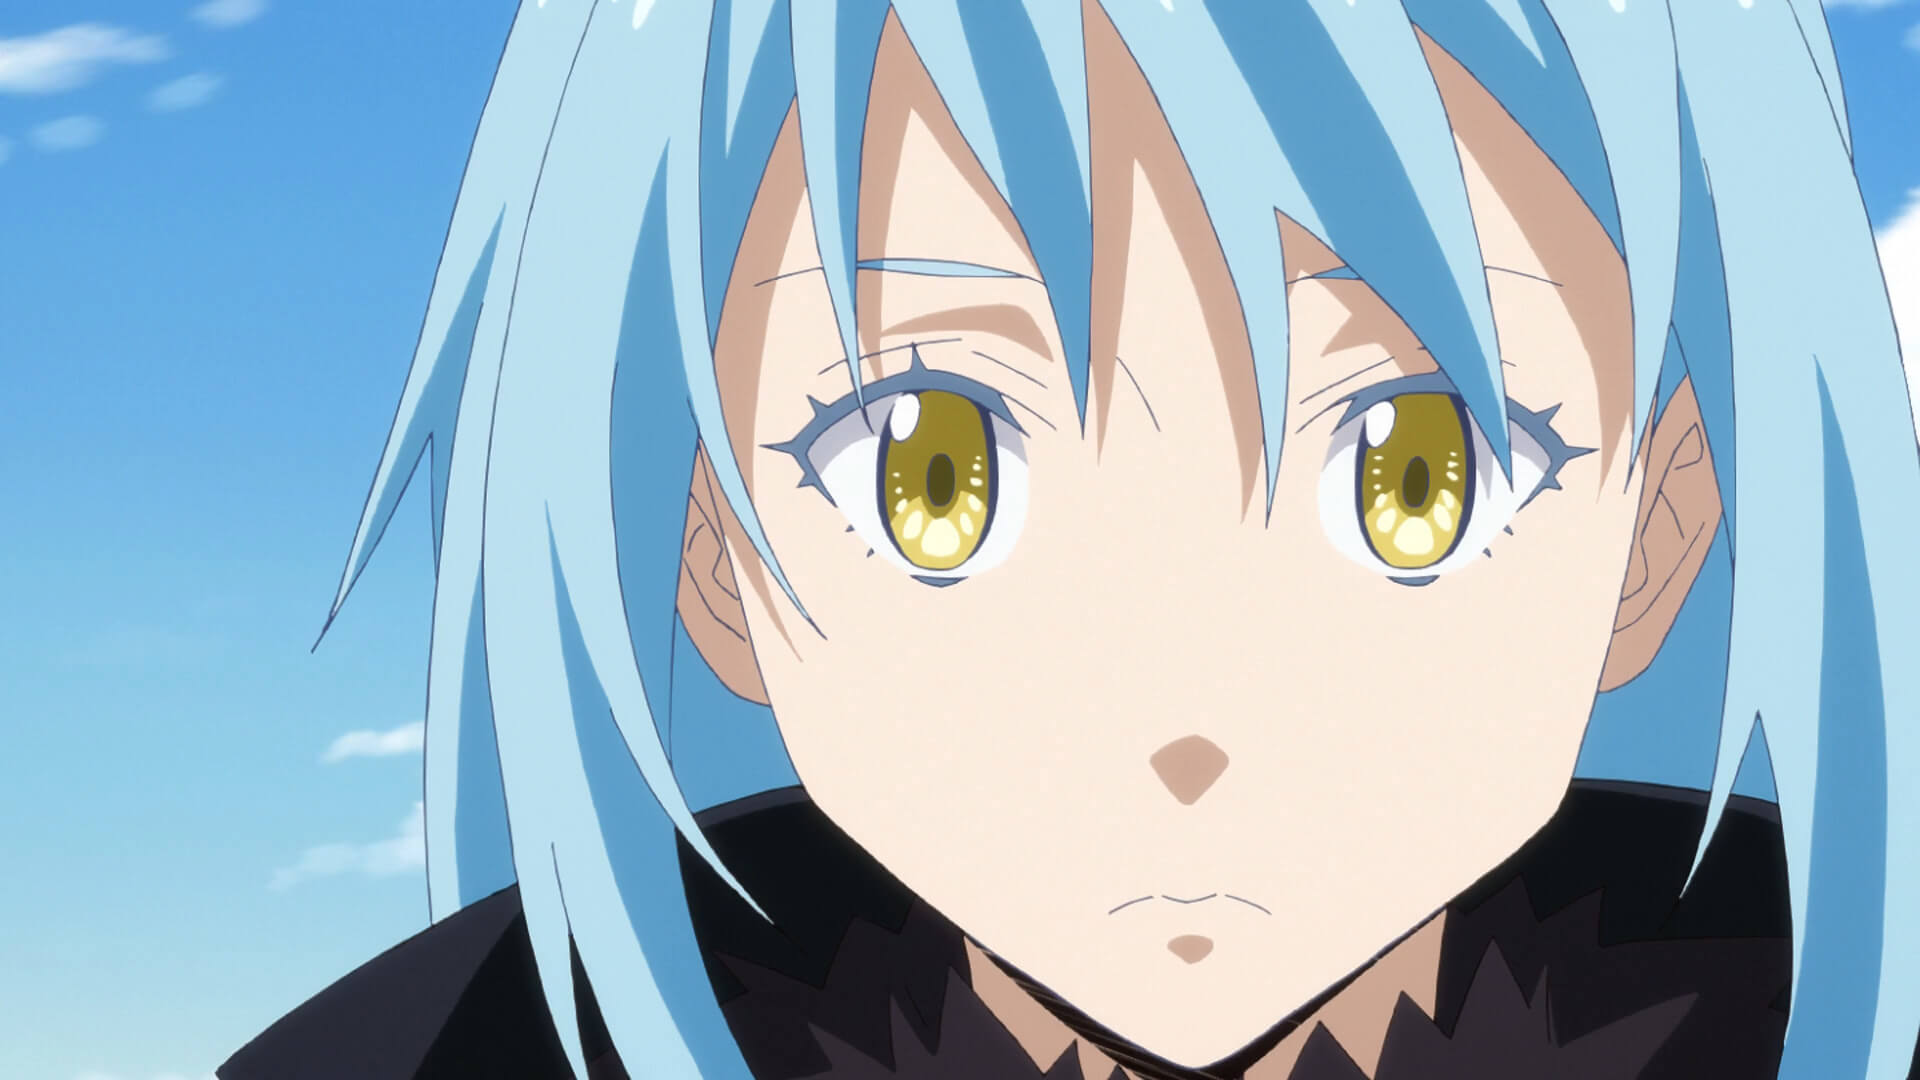 That Time I Got Reincarnated As A Slime Chapter 83 Release Date Raw Scans Spoilers Where To Read Tensei Shitara Suraimu Datta Ken Chapter 83 Online Anime News And Facts